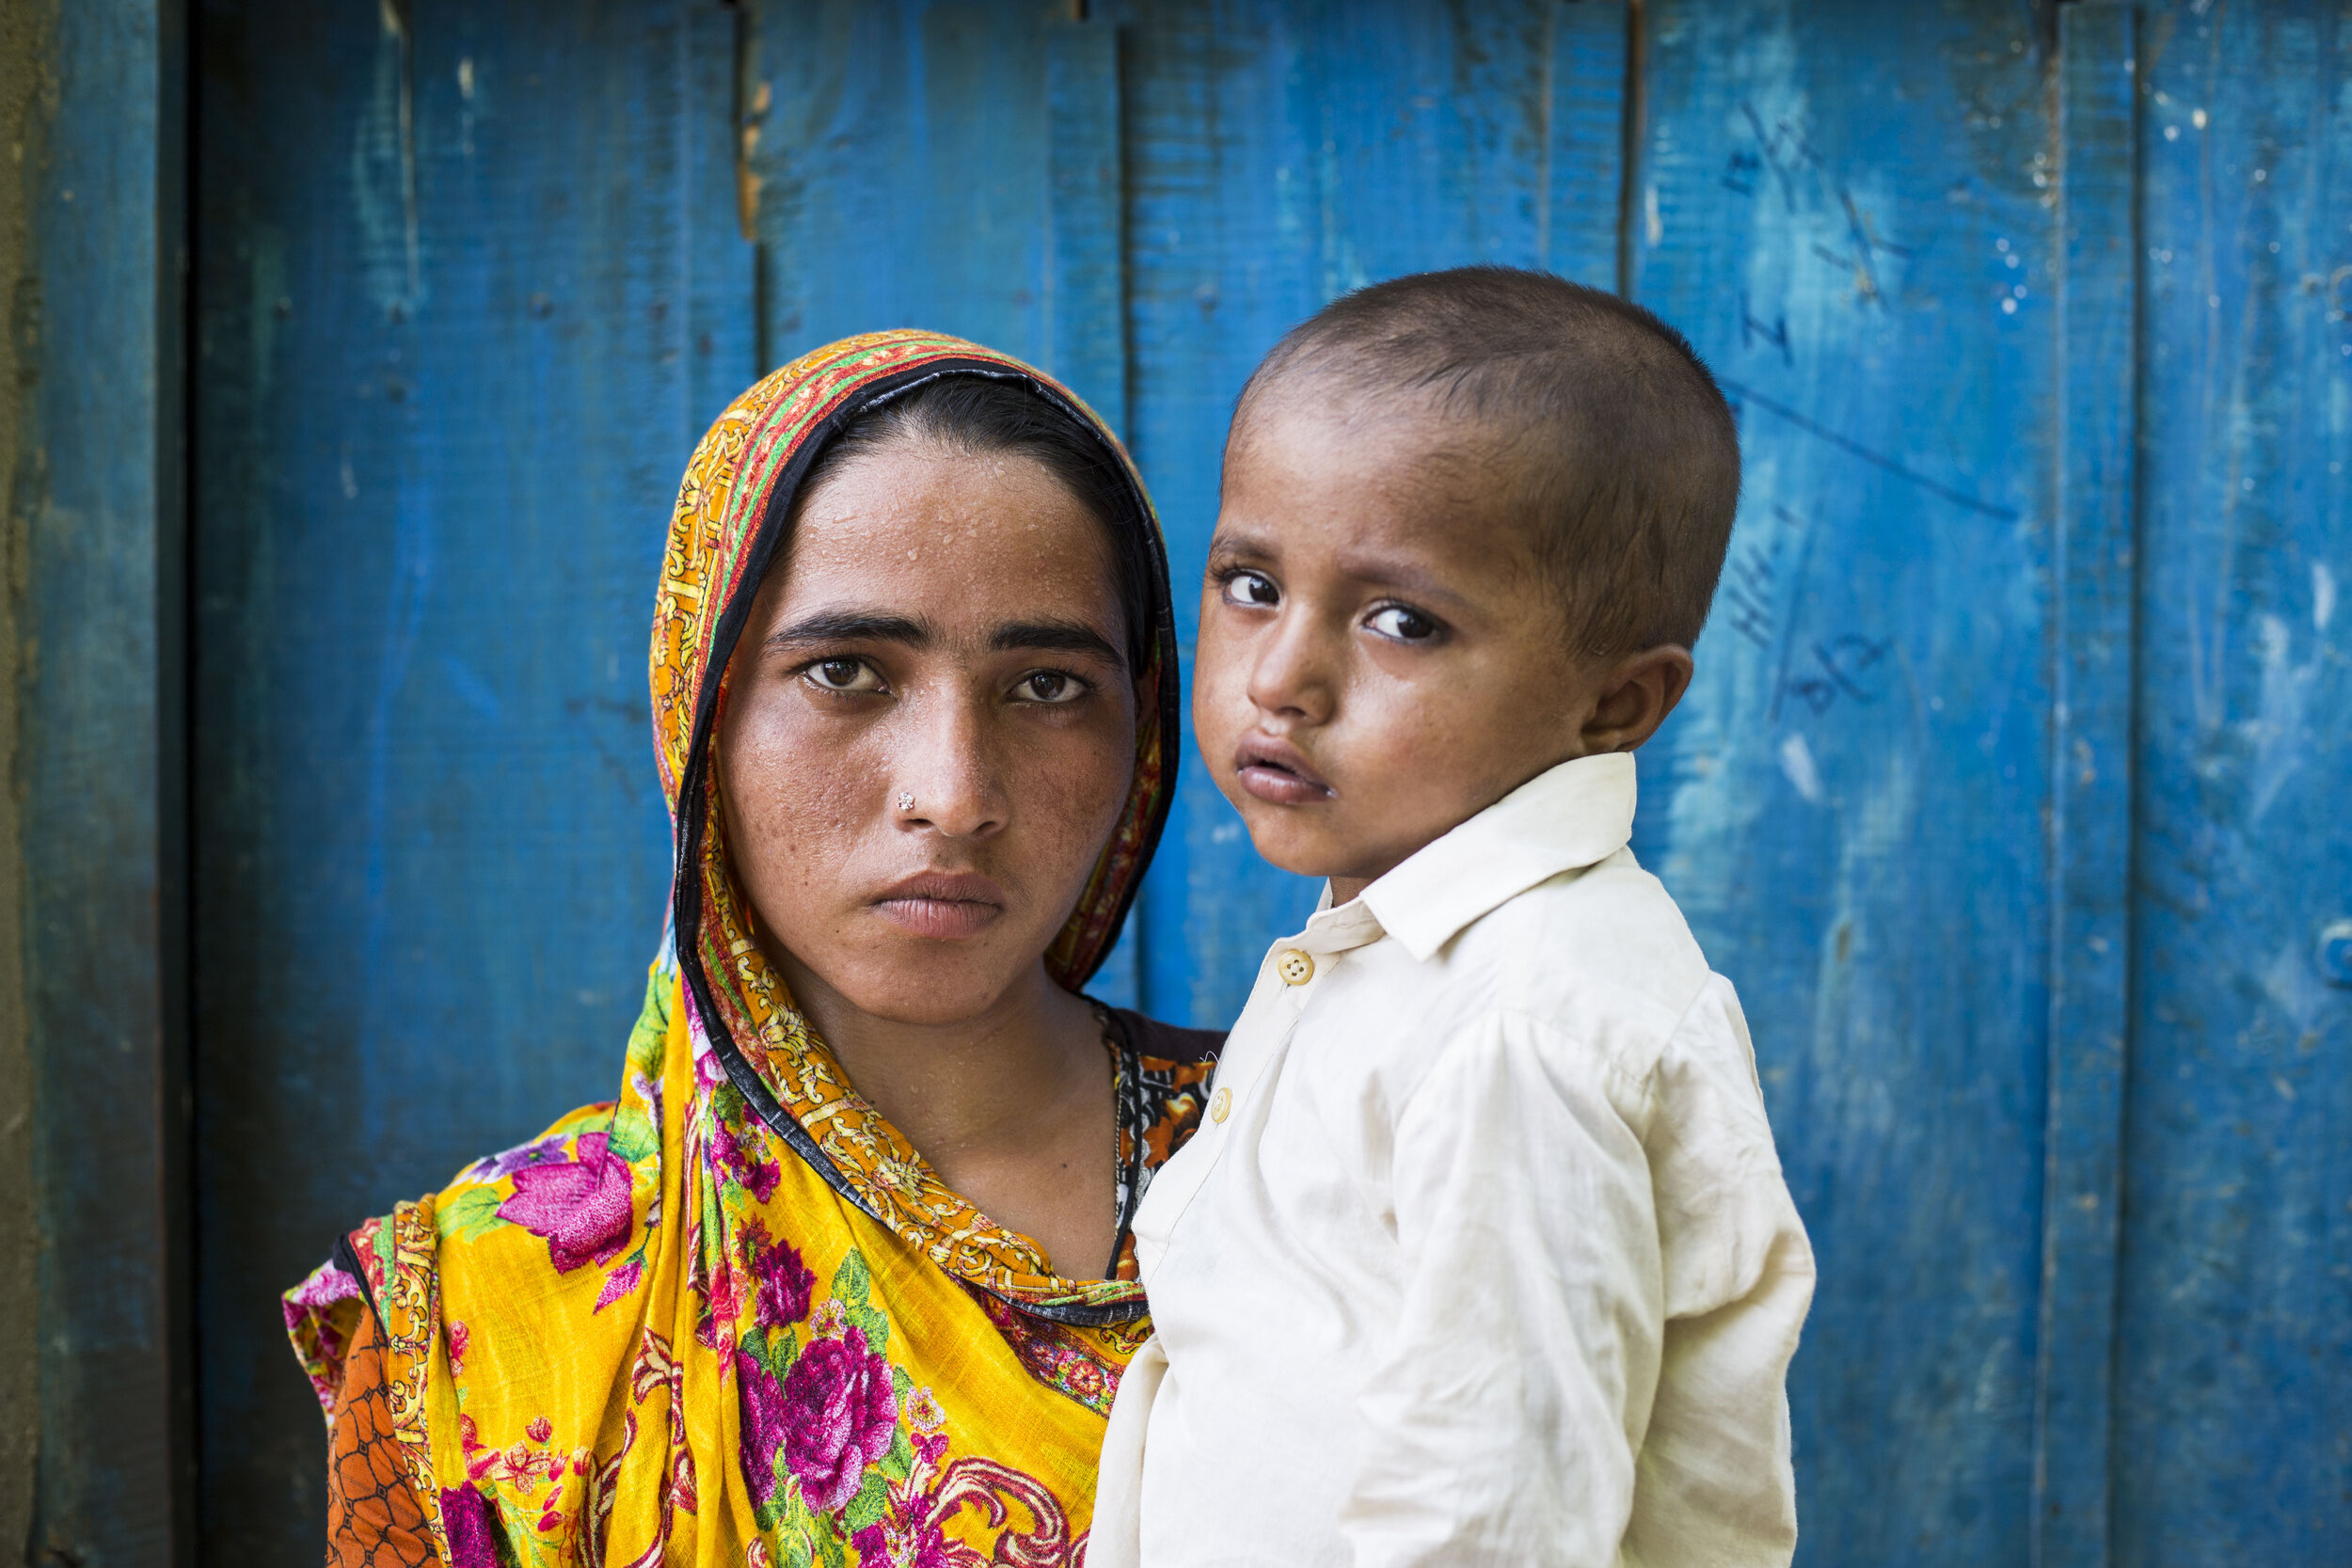  Shamshad, 19-year-old holds her 3-year-old son Waqar Ali, who has been diagnosed with HIV in Subhani Shar village, around 8 km from Ratodero on July 25, 2019 in Sind, Pakistan.  